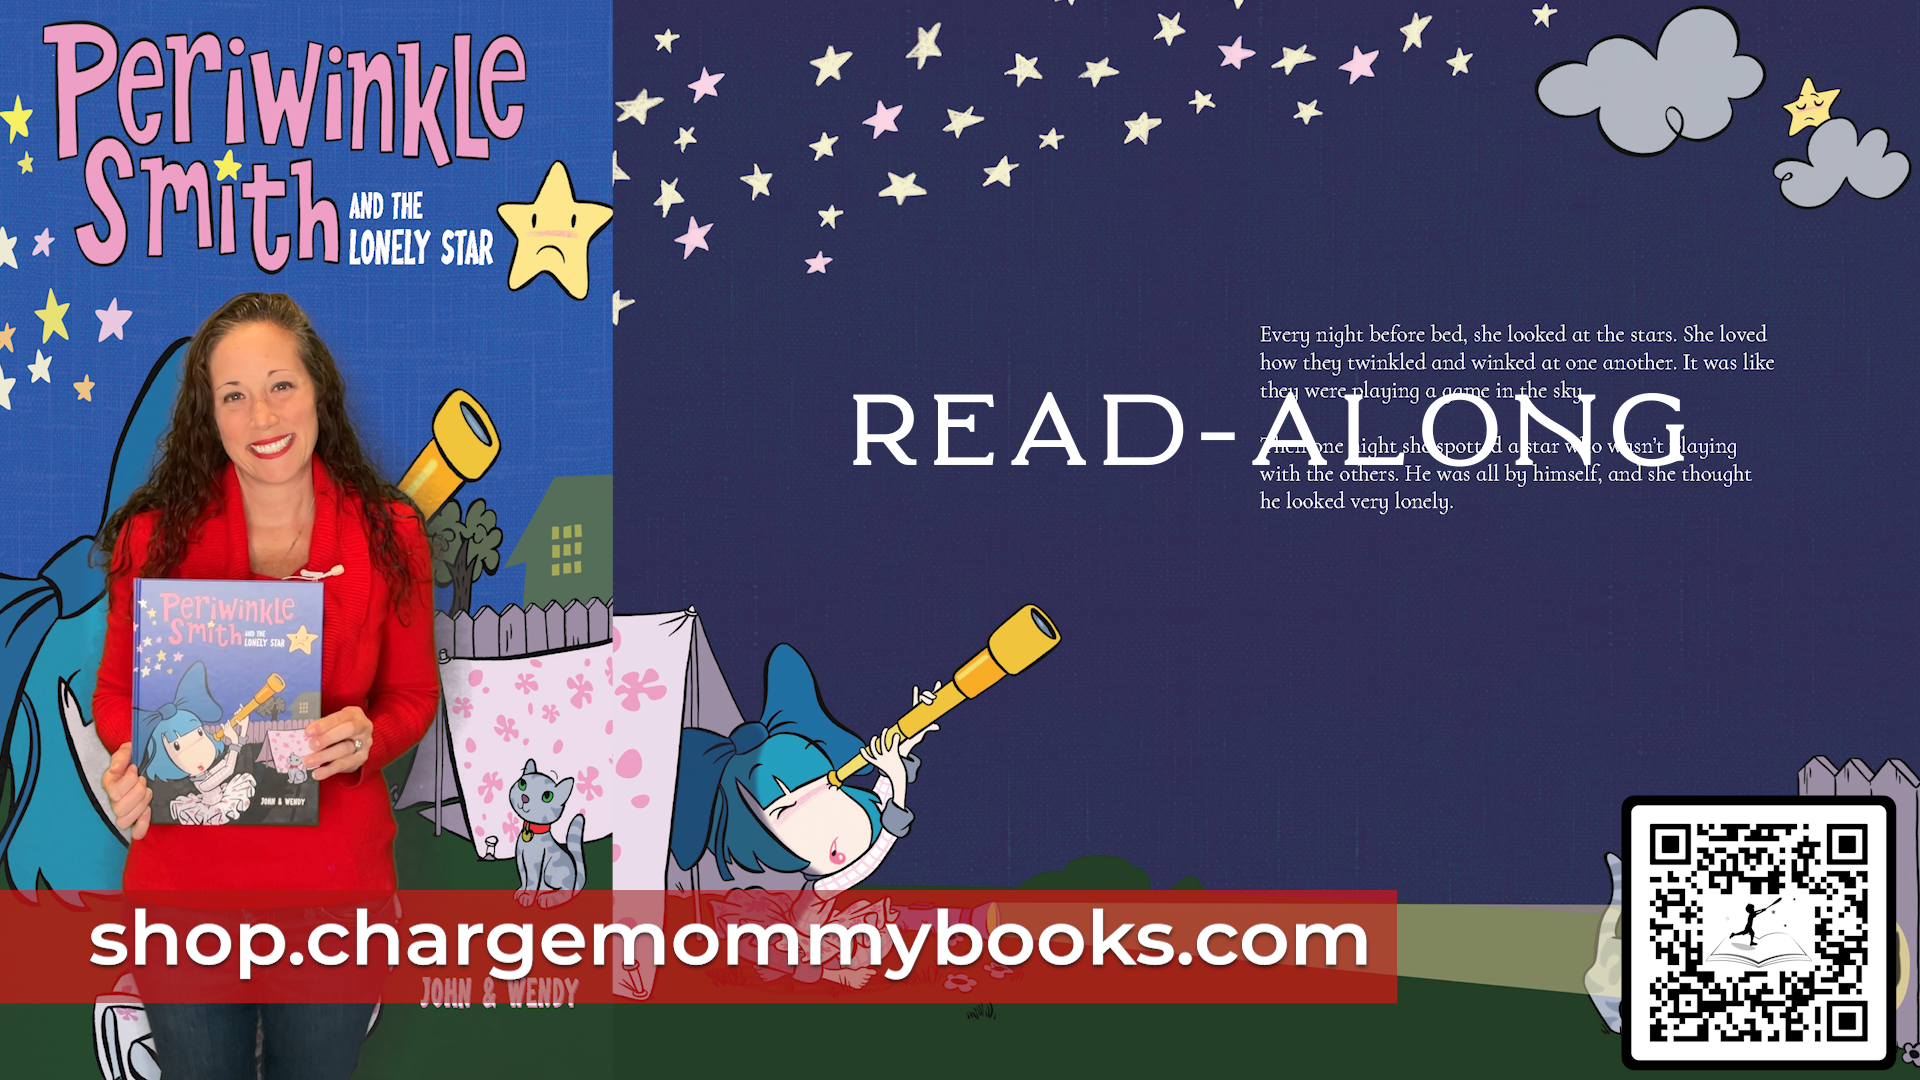 Load video: Read along with Brooke Vitale from Charge Mommy Books as she reads Periwinkle Smith and the Lonely Star written and illustrated by John &amp; Wendy.